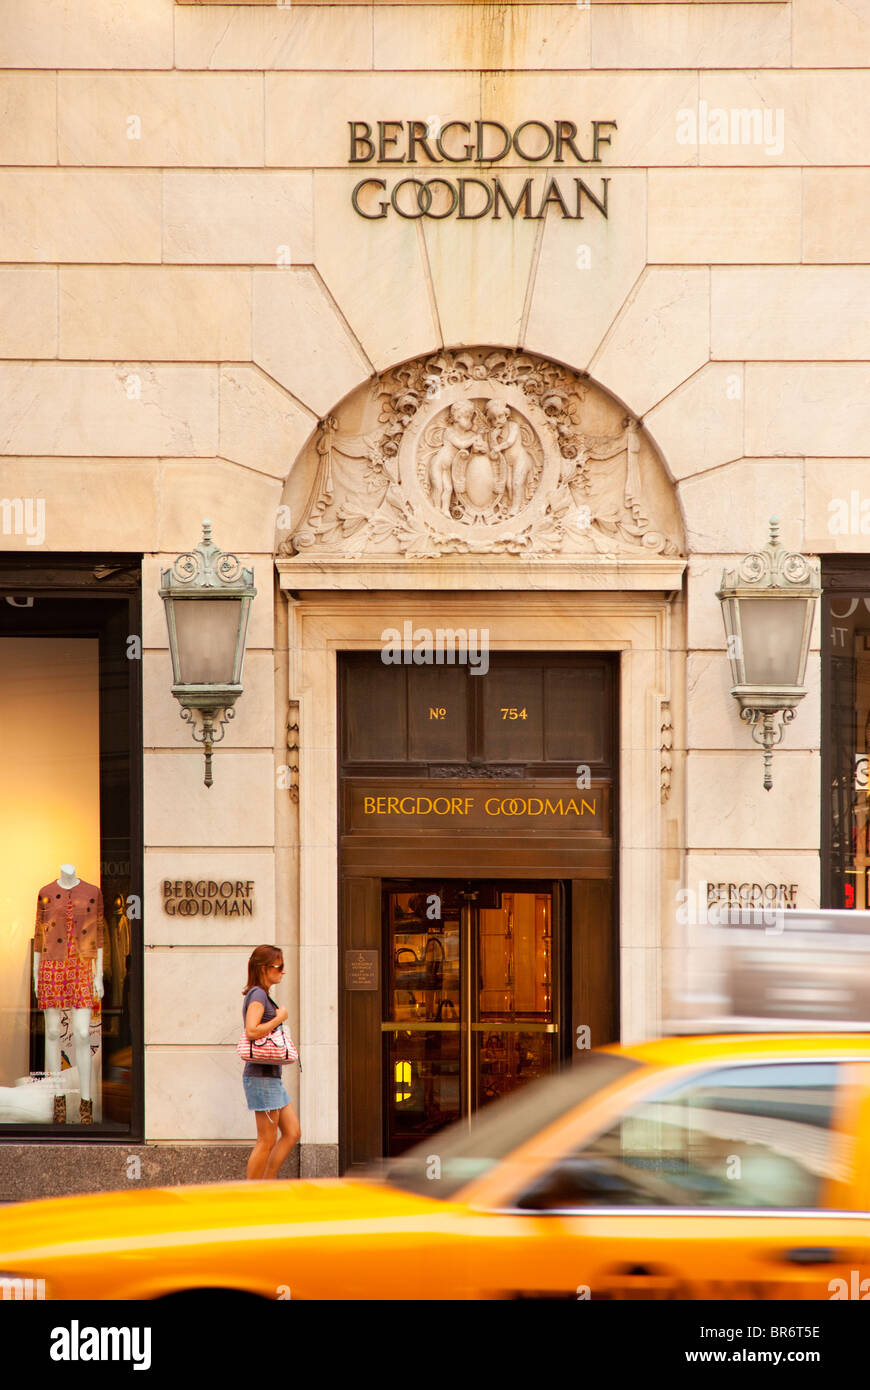 Bergdorf Goodman Entrance 5th Avenue New York Photograph by DW labs  Incorporated - Pixels